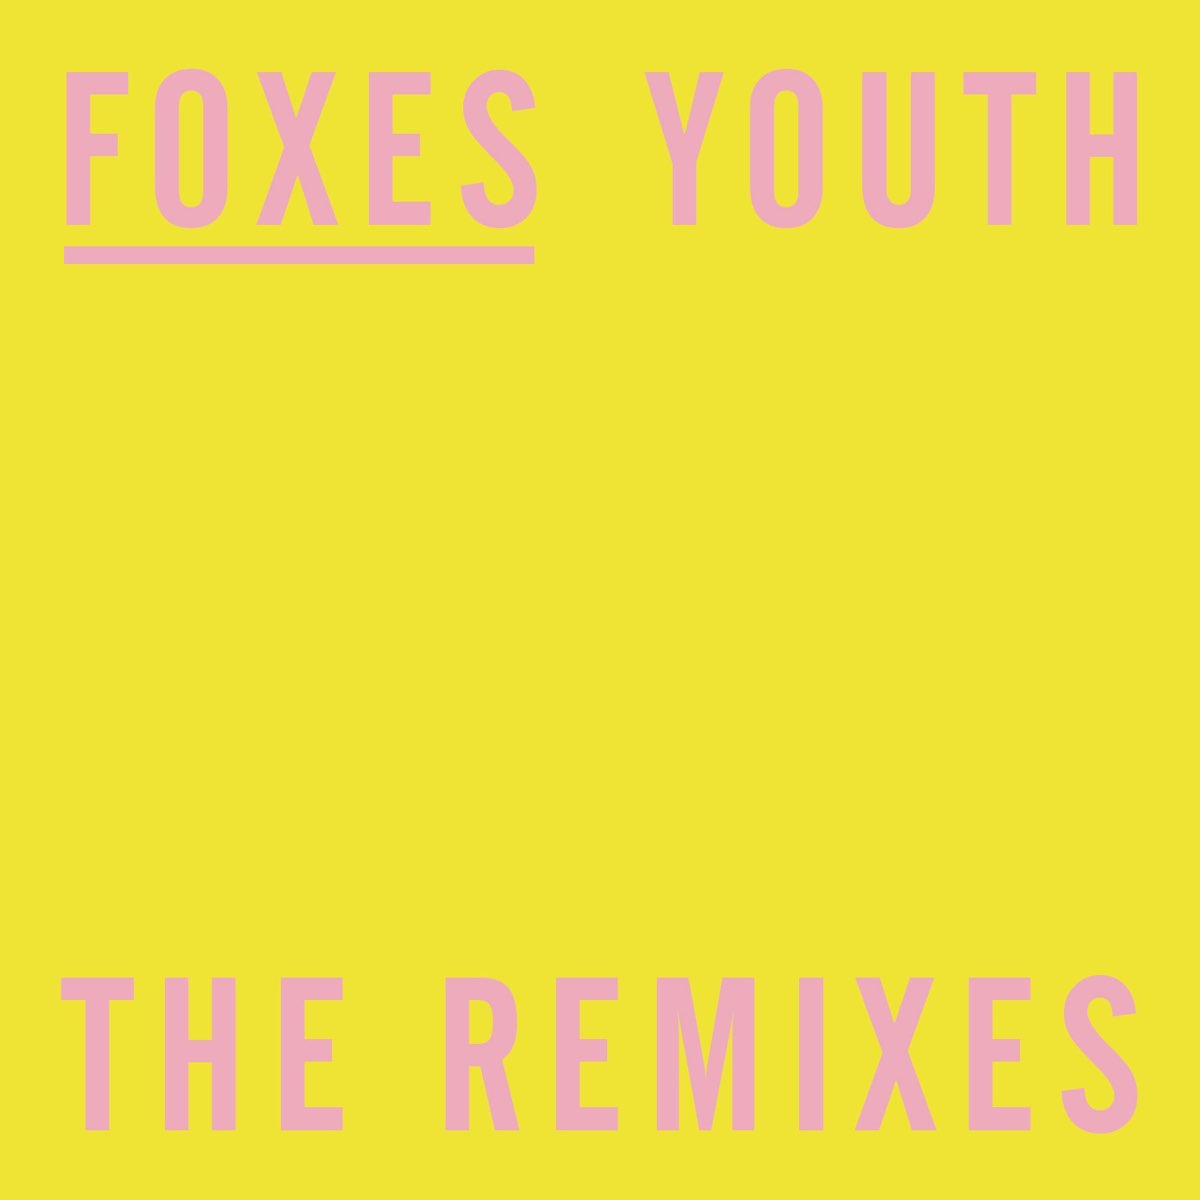 Youth (The Remixes) - EP by Foxes on Apple Music